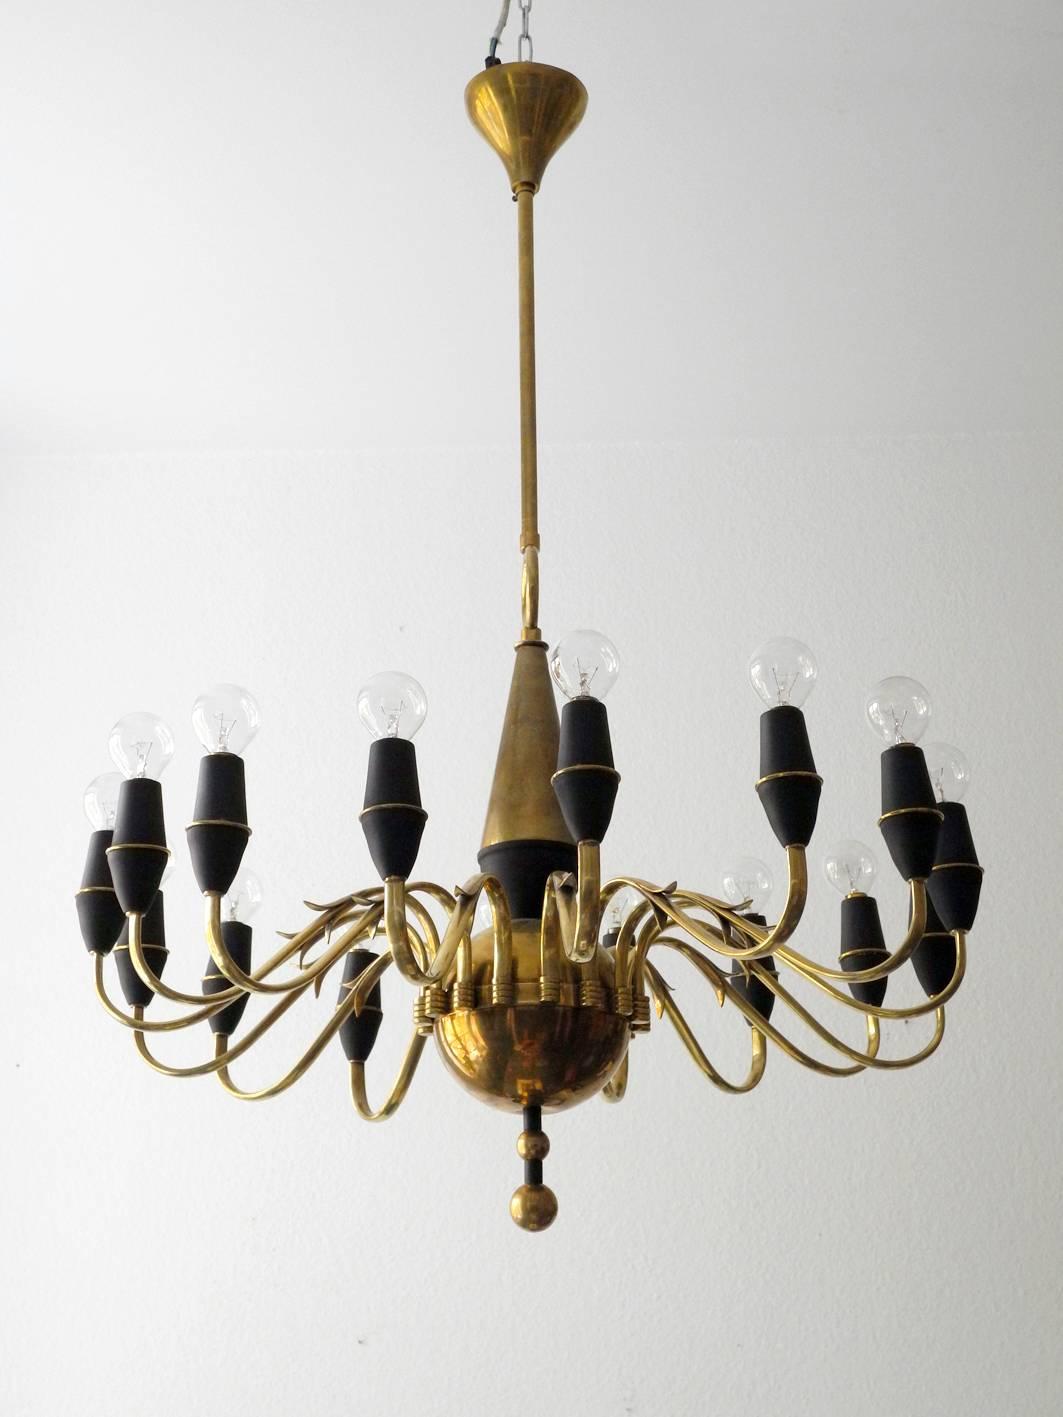 Beautiful huge original midcentury brass chandelier stilnovo era with 16 arms with E14 sockets. Made in Italy.
Total lamp in brass, cones are made of black metal.
Beautiful design with curved arms and black sockets.
Due to age professionally